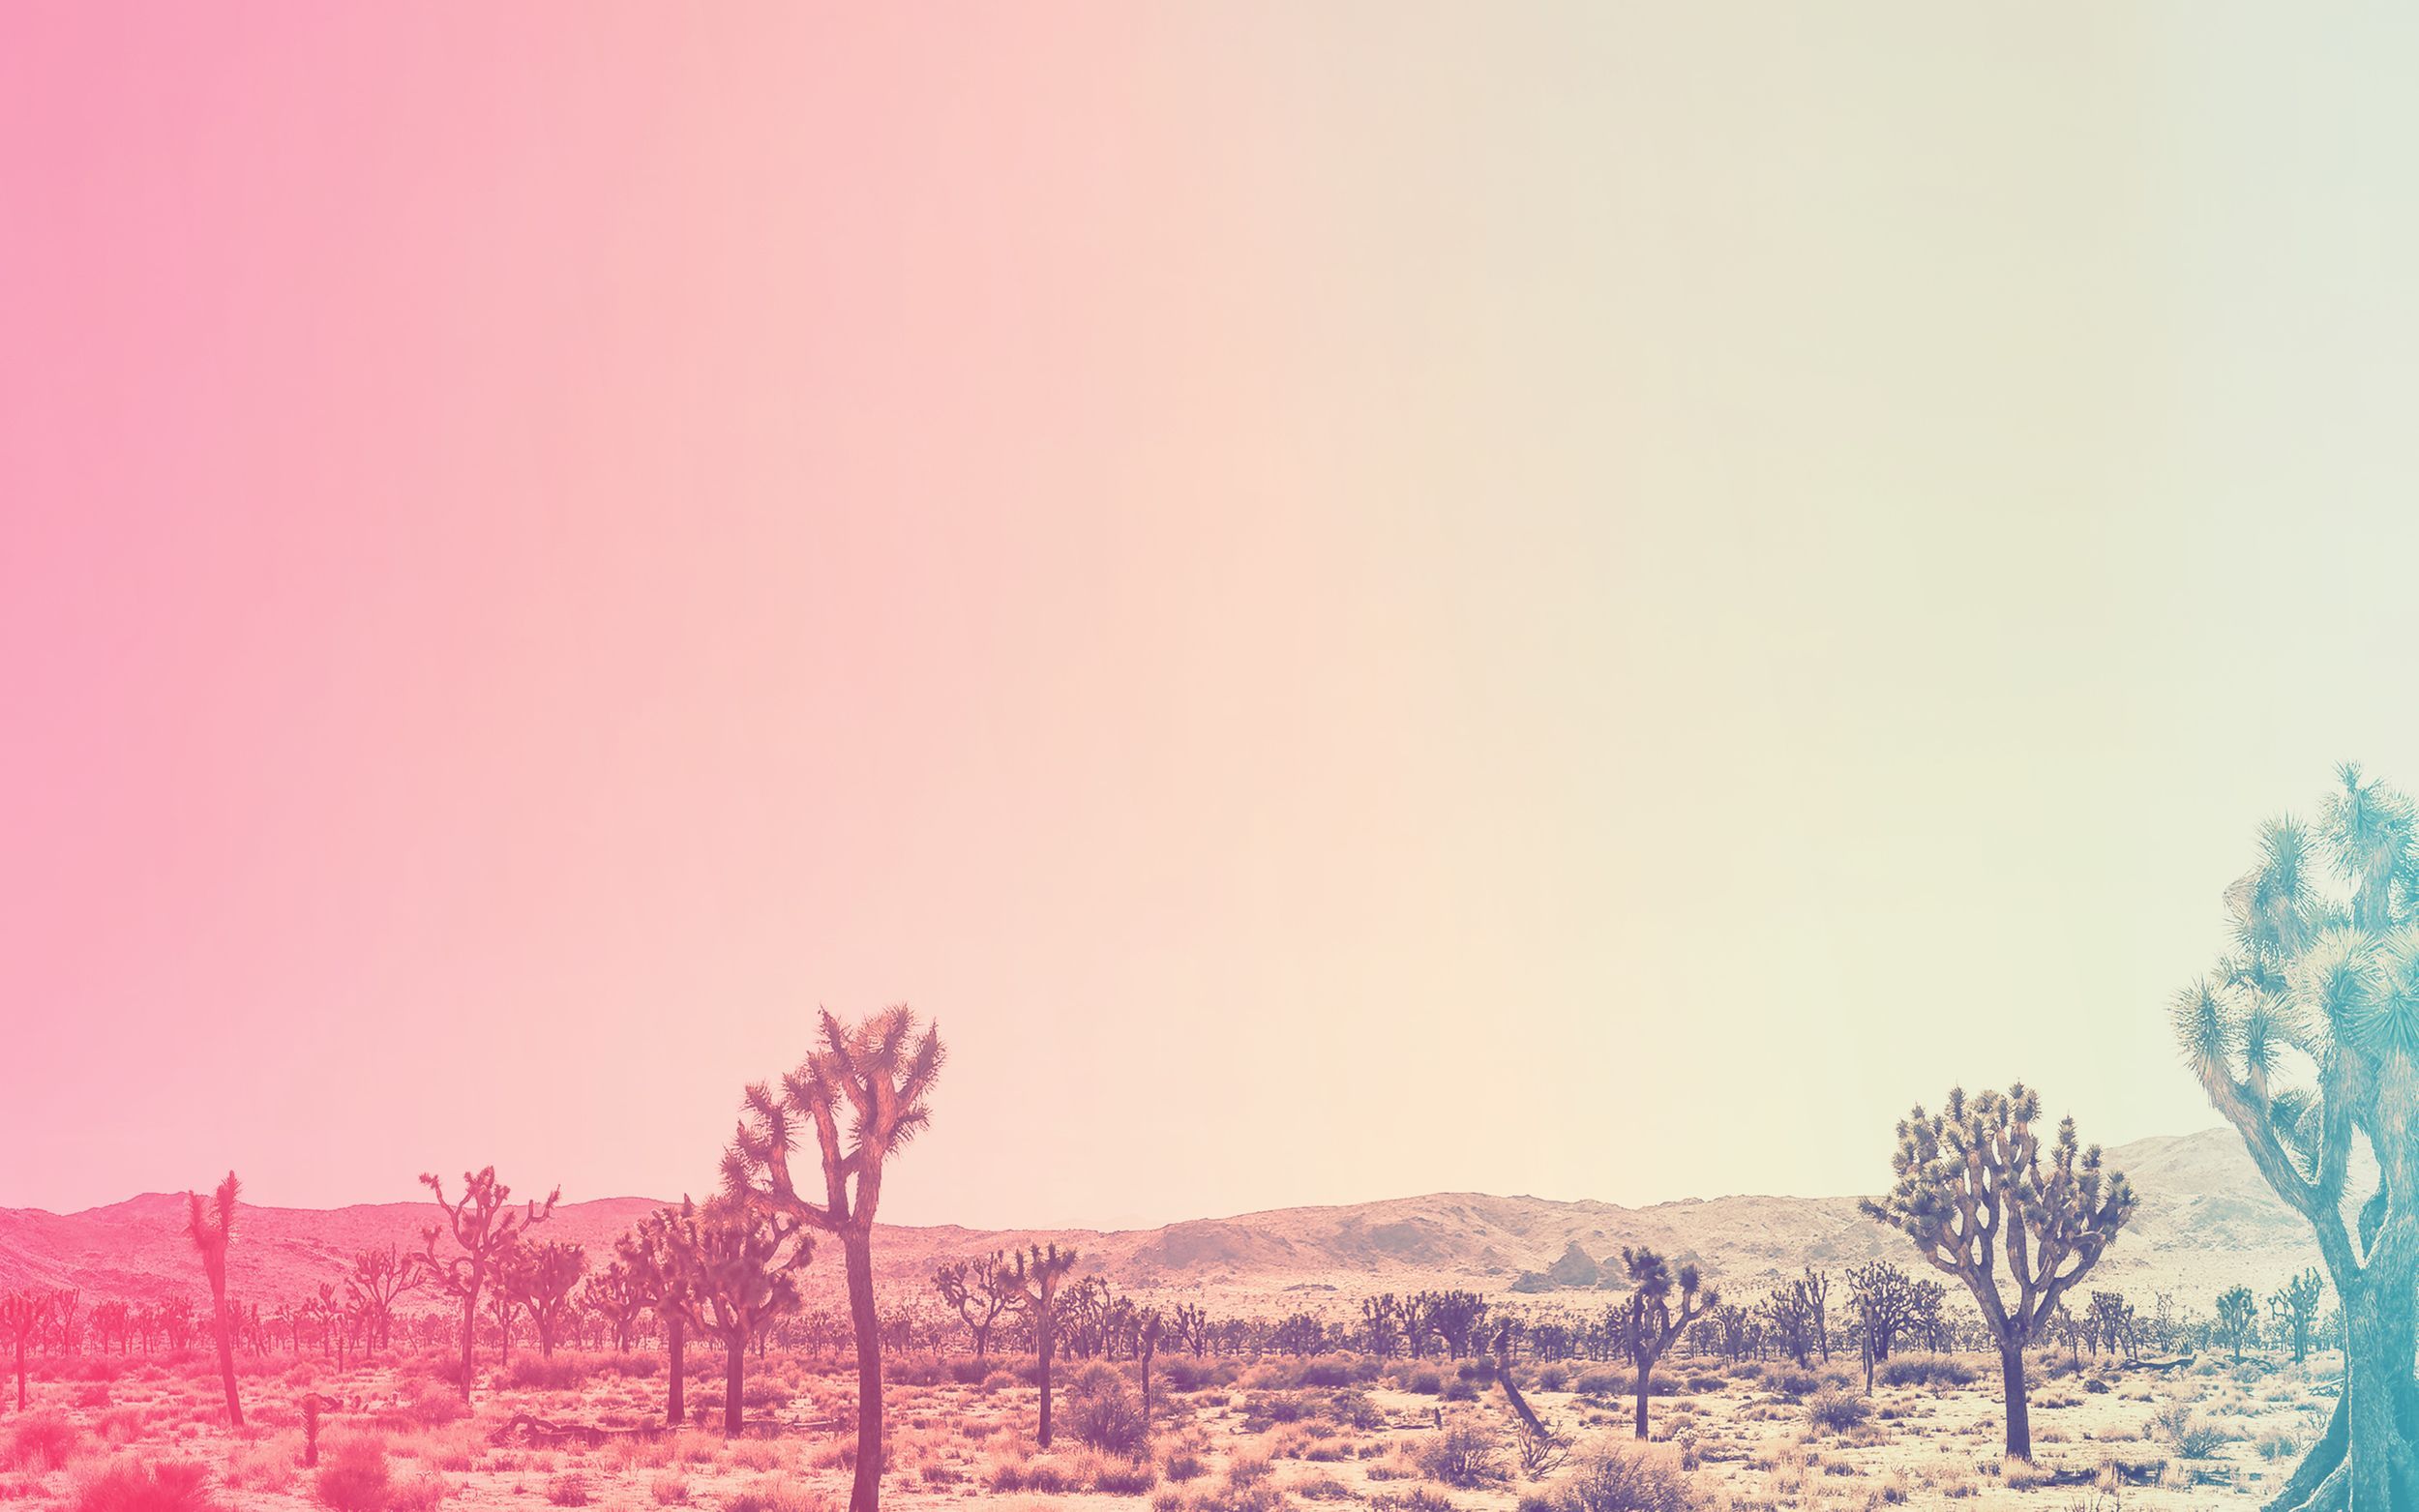 A Joshua tree forest in the desert with a pink and blue gradient filter - Desert